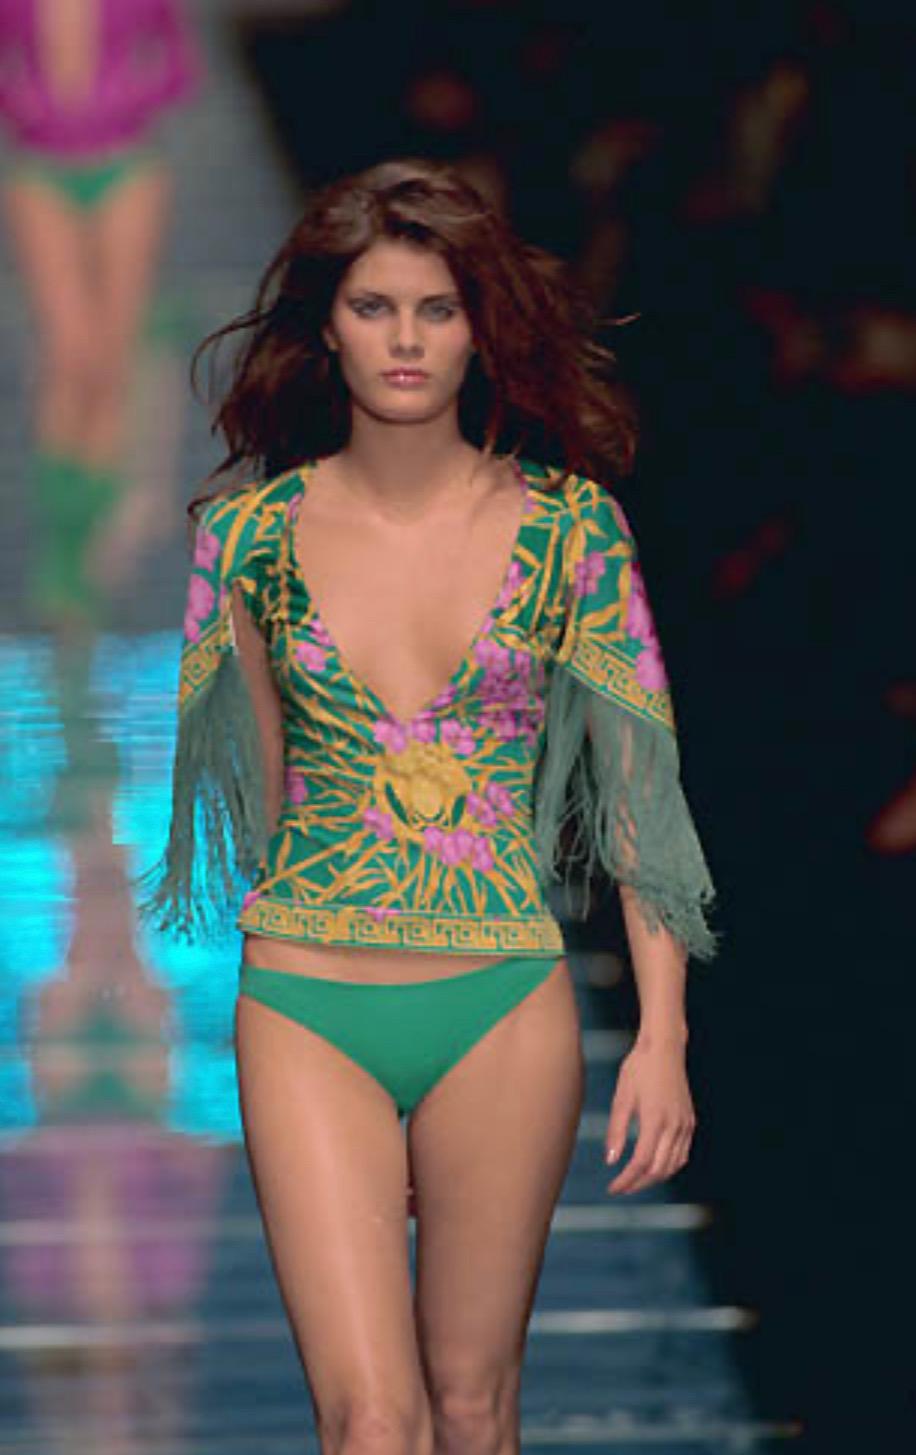 Presenting a fabulous jungle and orchid print Gianni Versace Couture shirt, designed by Donatella Versace. From the Spring/Summer 2000 collection, this top debuted as part of look 68 modeled by Isabeli Fontana. From the same collection as JLo's